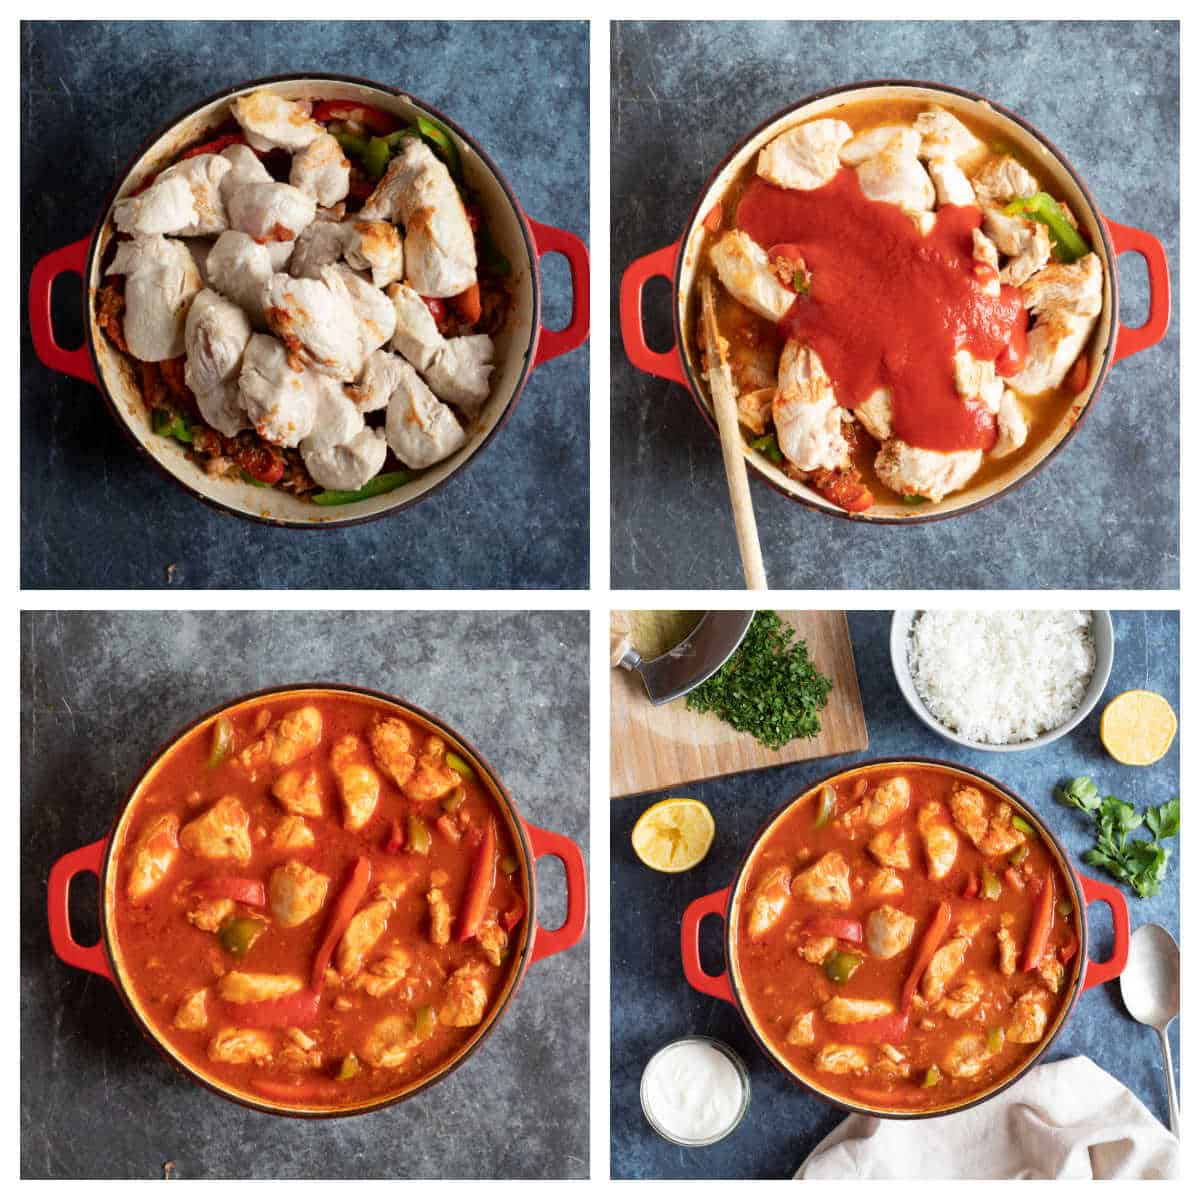 Step by step process shots of making chicken goulash.